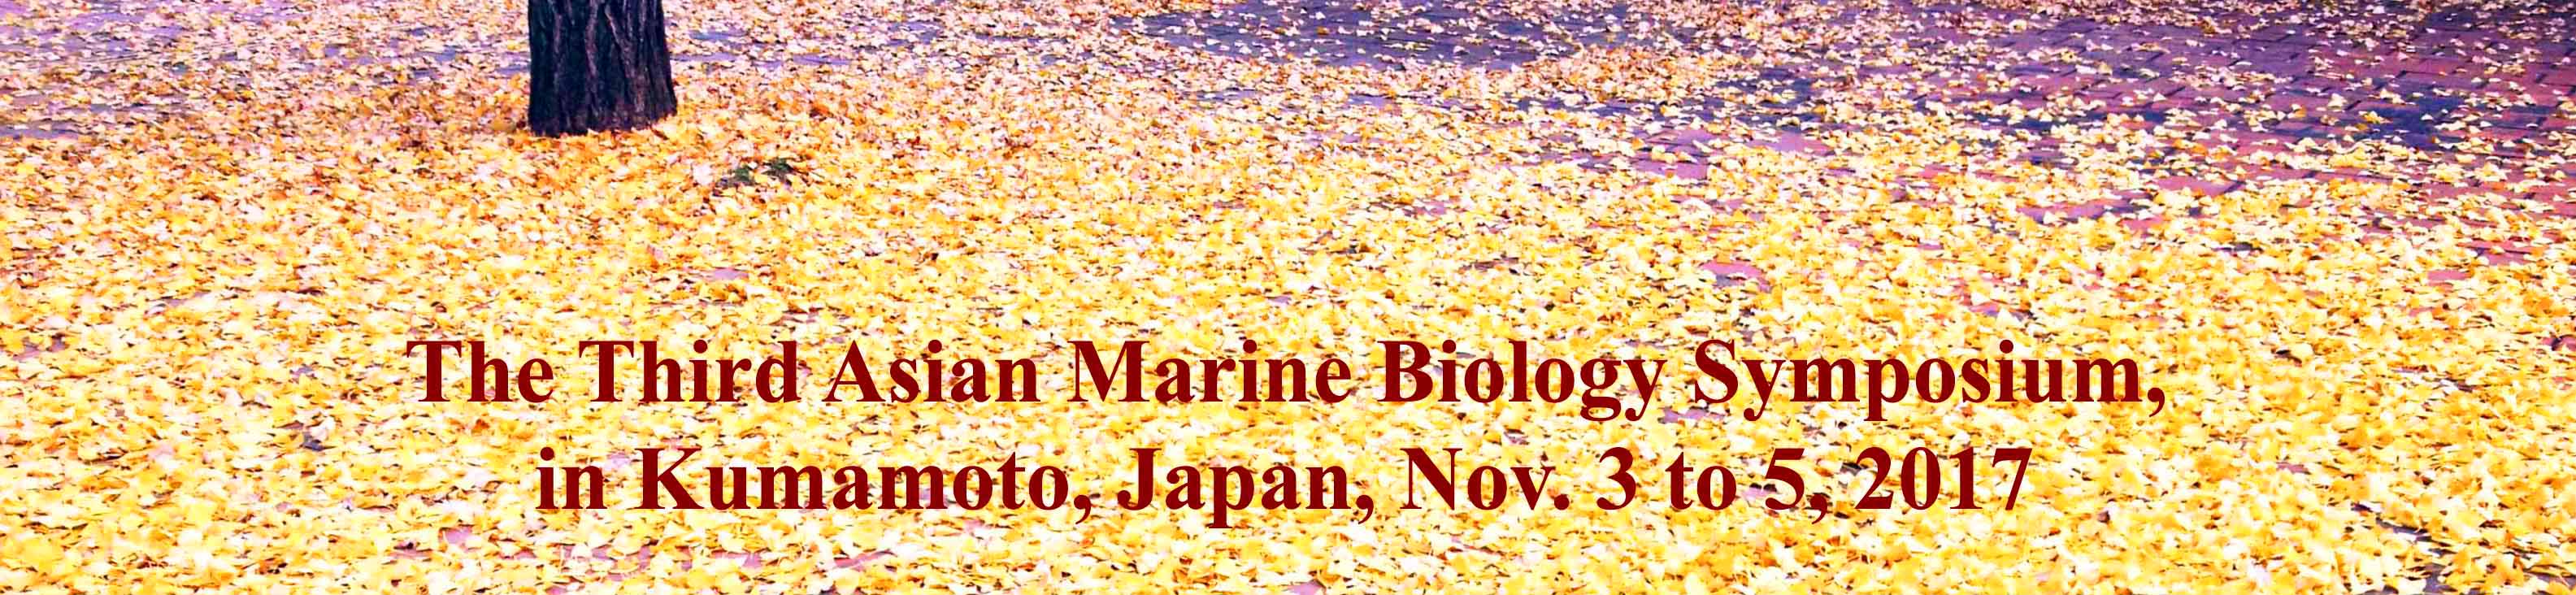 Welcome to The Third Asian Marine Biology Symposium